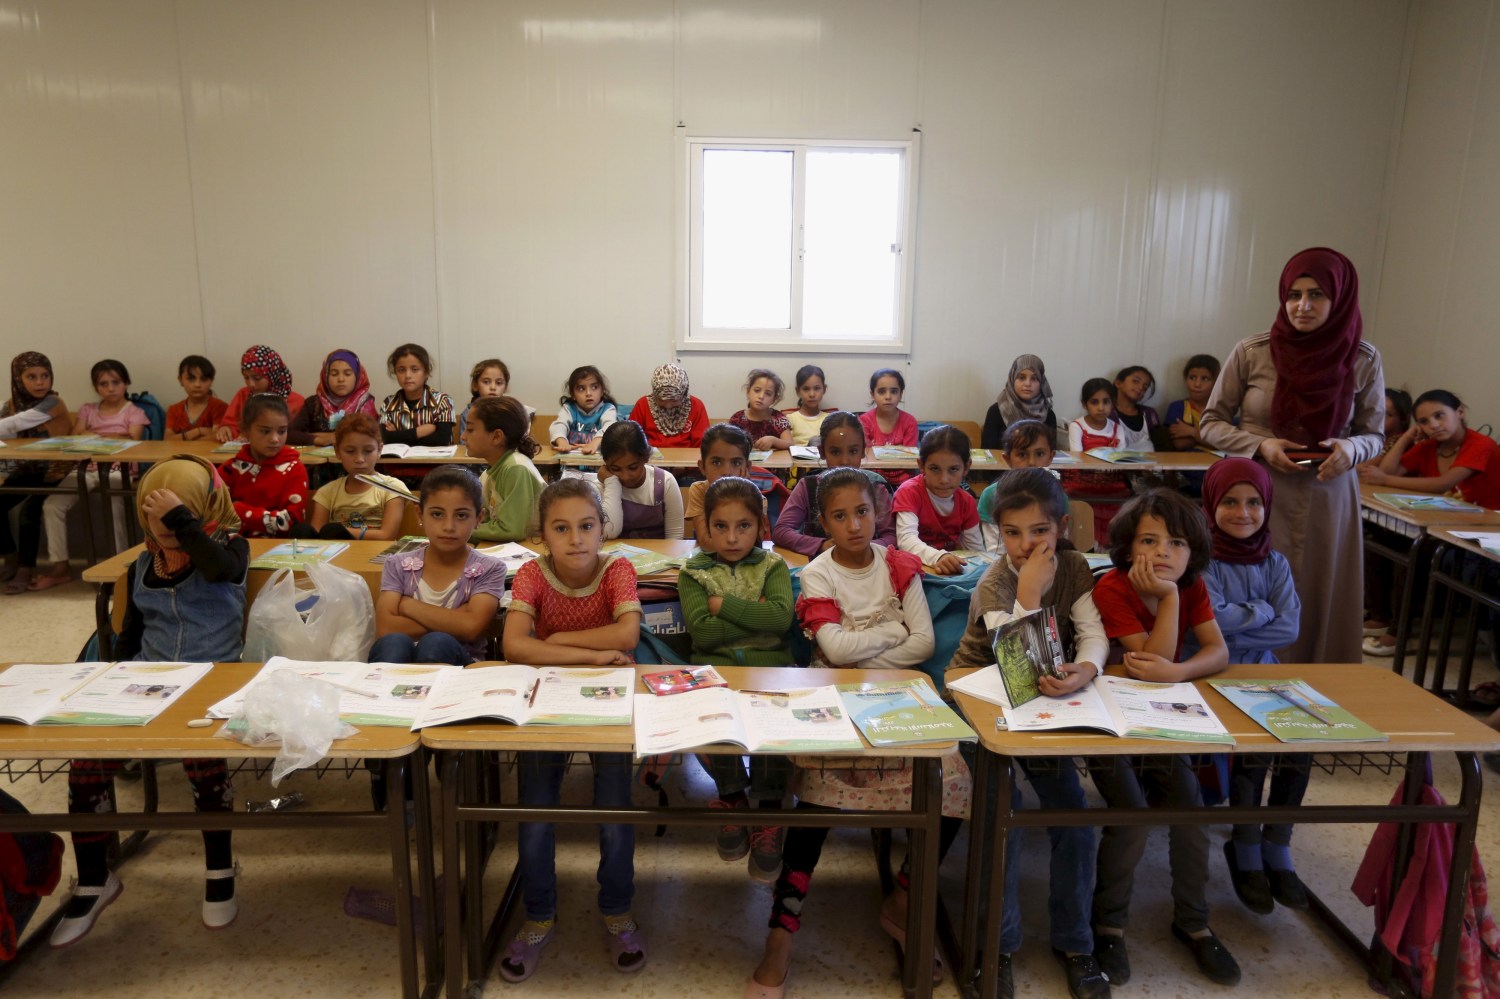 Teacher Hanan Anzi poses for a picture with Syrian refugee students inside their classroom at one of the UNICEF schools at Al Zaatari refugee camp in the Jordanian city of Mafraq, near the border with Syria, September 22, 2015. Nearly three years after Taliban gunmen shot Pakistani schoolgirl Malala Yousafzai, the teenage activist last week urged world leaders gathered in New York to help millions more children go to school. World Teachers' Day falls on 5 October, a Unesco initiative highlighting the work of educators struggling to teach children amid intimidation in Pakistan, conflict in Syria or poverty in Vietnam. Even so, there have been some improvements: the number of children not attending primary school has plummeted to an estimated 57 million worldwide in 2015, the U.N. says, down from 100 million 15 years ago. Reuters photographers have documented learning around the world, from well-resourced schools to pupils crammed into corridors in the Philippines, on boats in Brazil or in crowded classrooms in Burundi. REUTERS/ Muhammad HamedPICTURE 17 OF 47 FOR WIDER IMAGE STORY "SCHOOLS AROUND THE WORLD"SEARCH "EDUCATORS SCHOOLS" FOR ALL IMAGES - GF10000226442